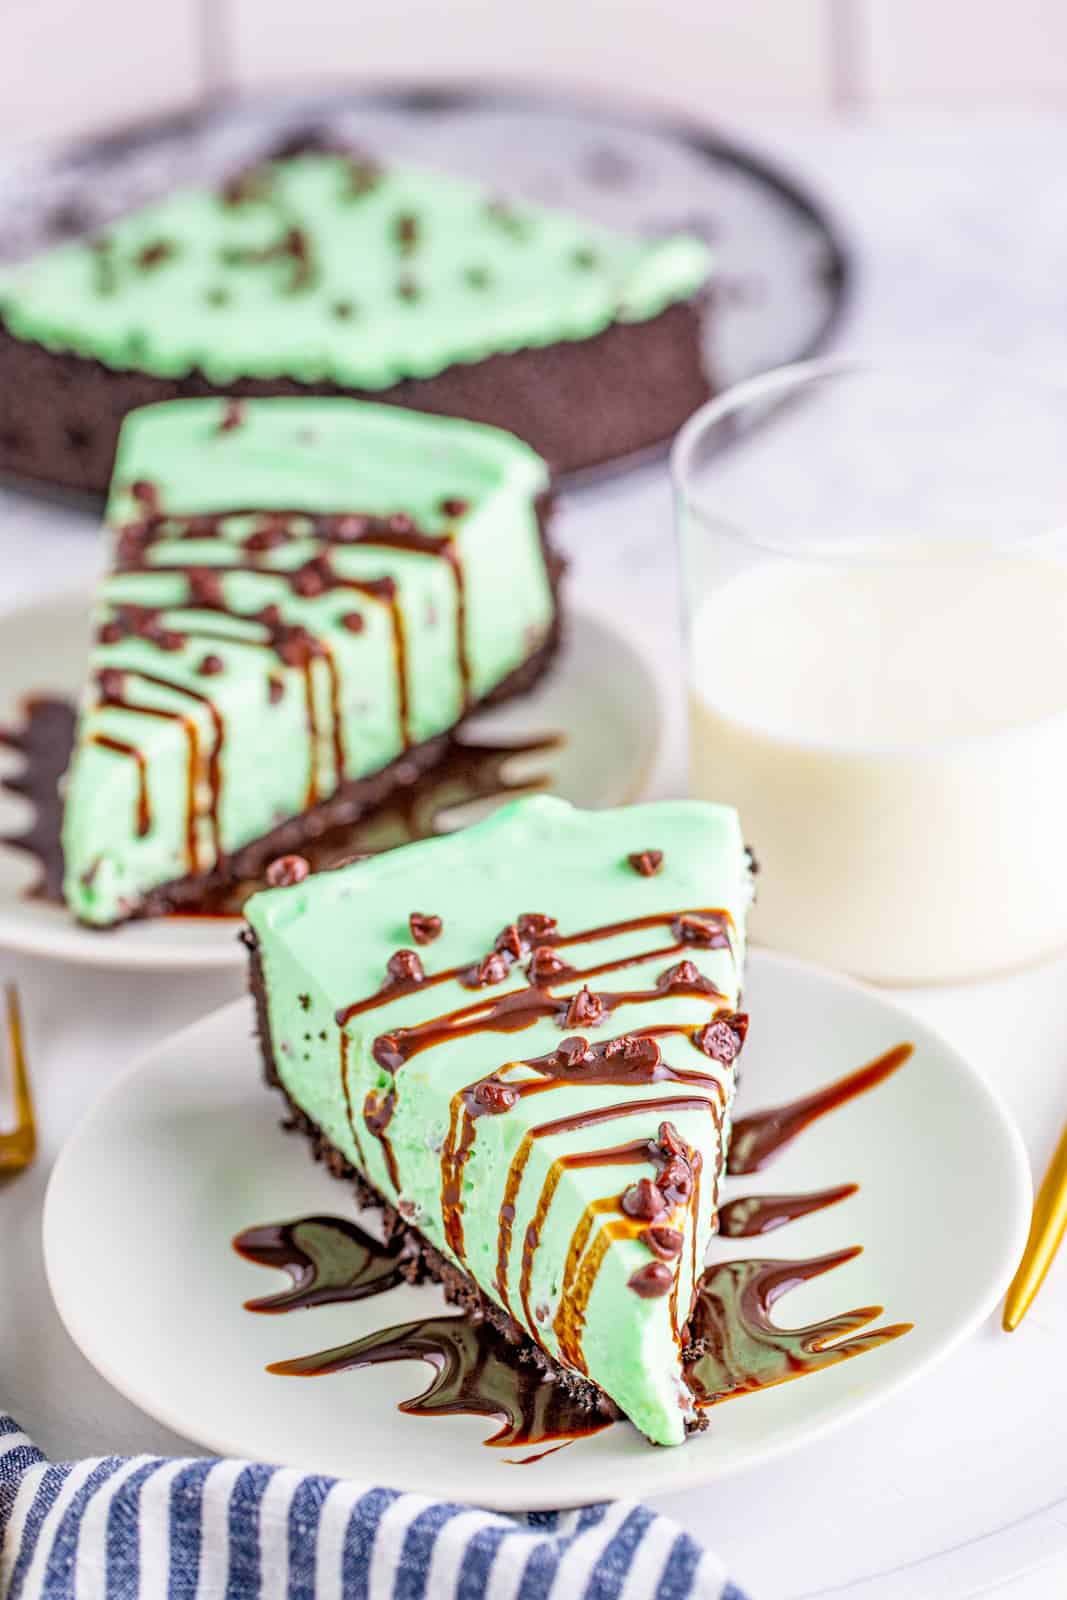 Two slices of No Bake Mint Chocolate Cheesecake on white plates with glass of milk.